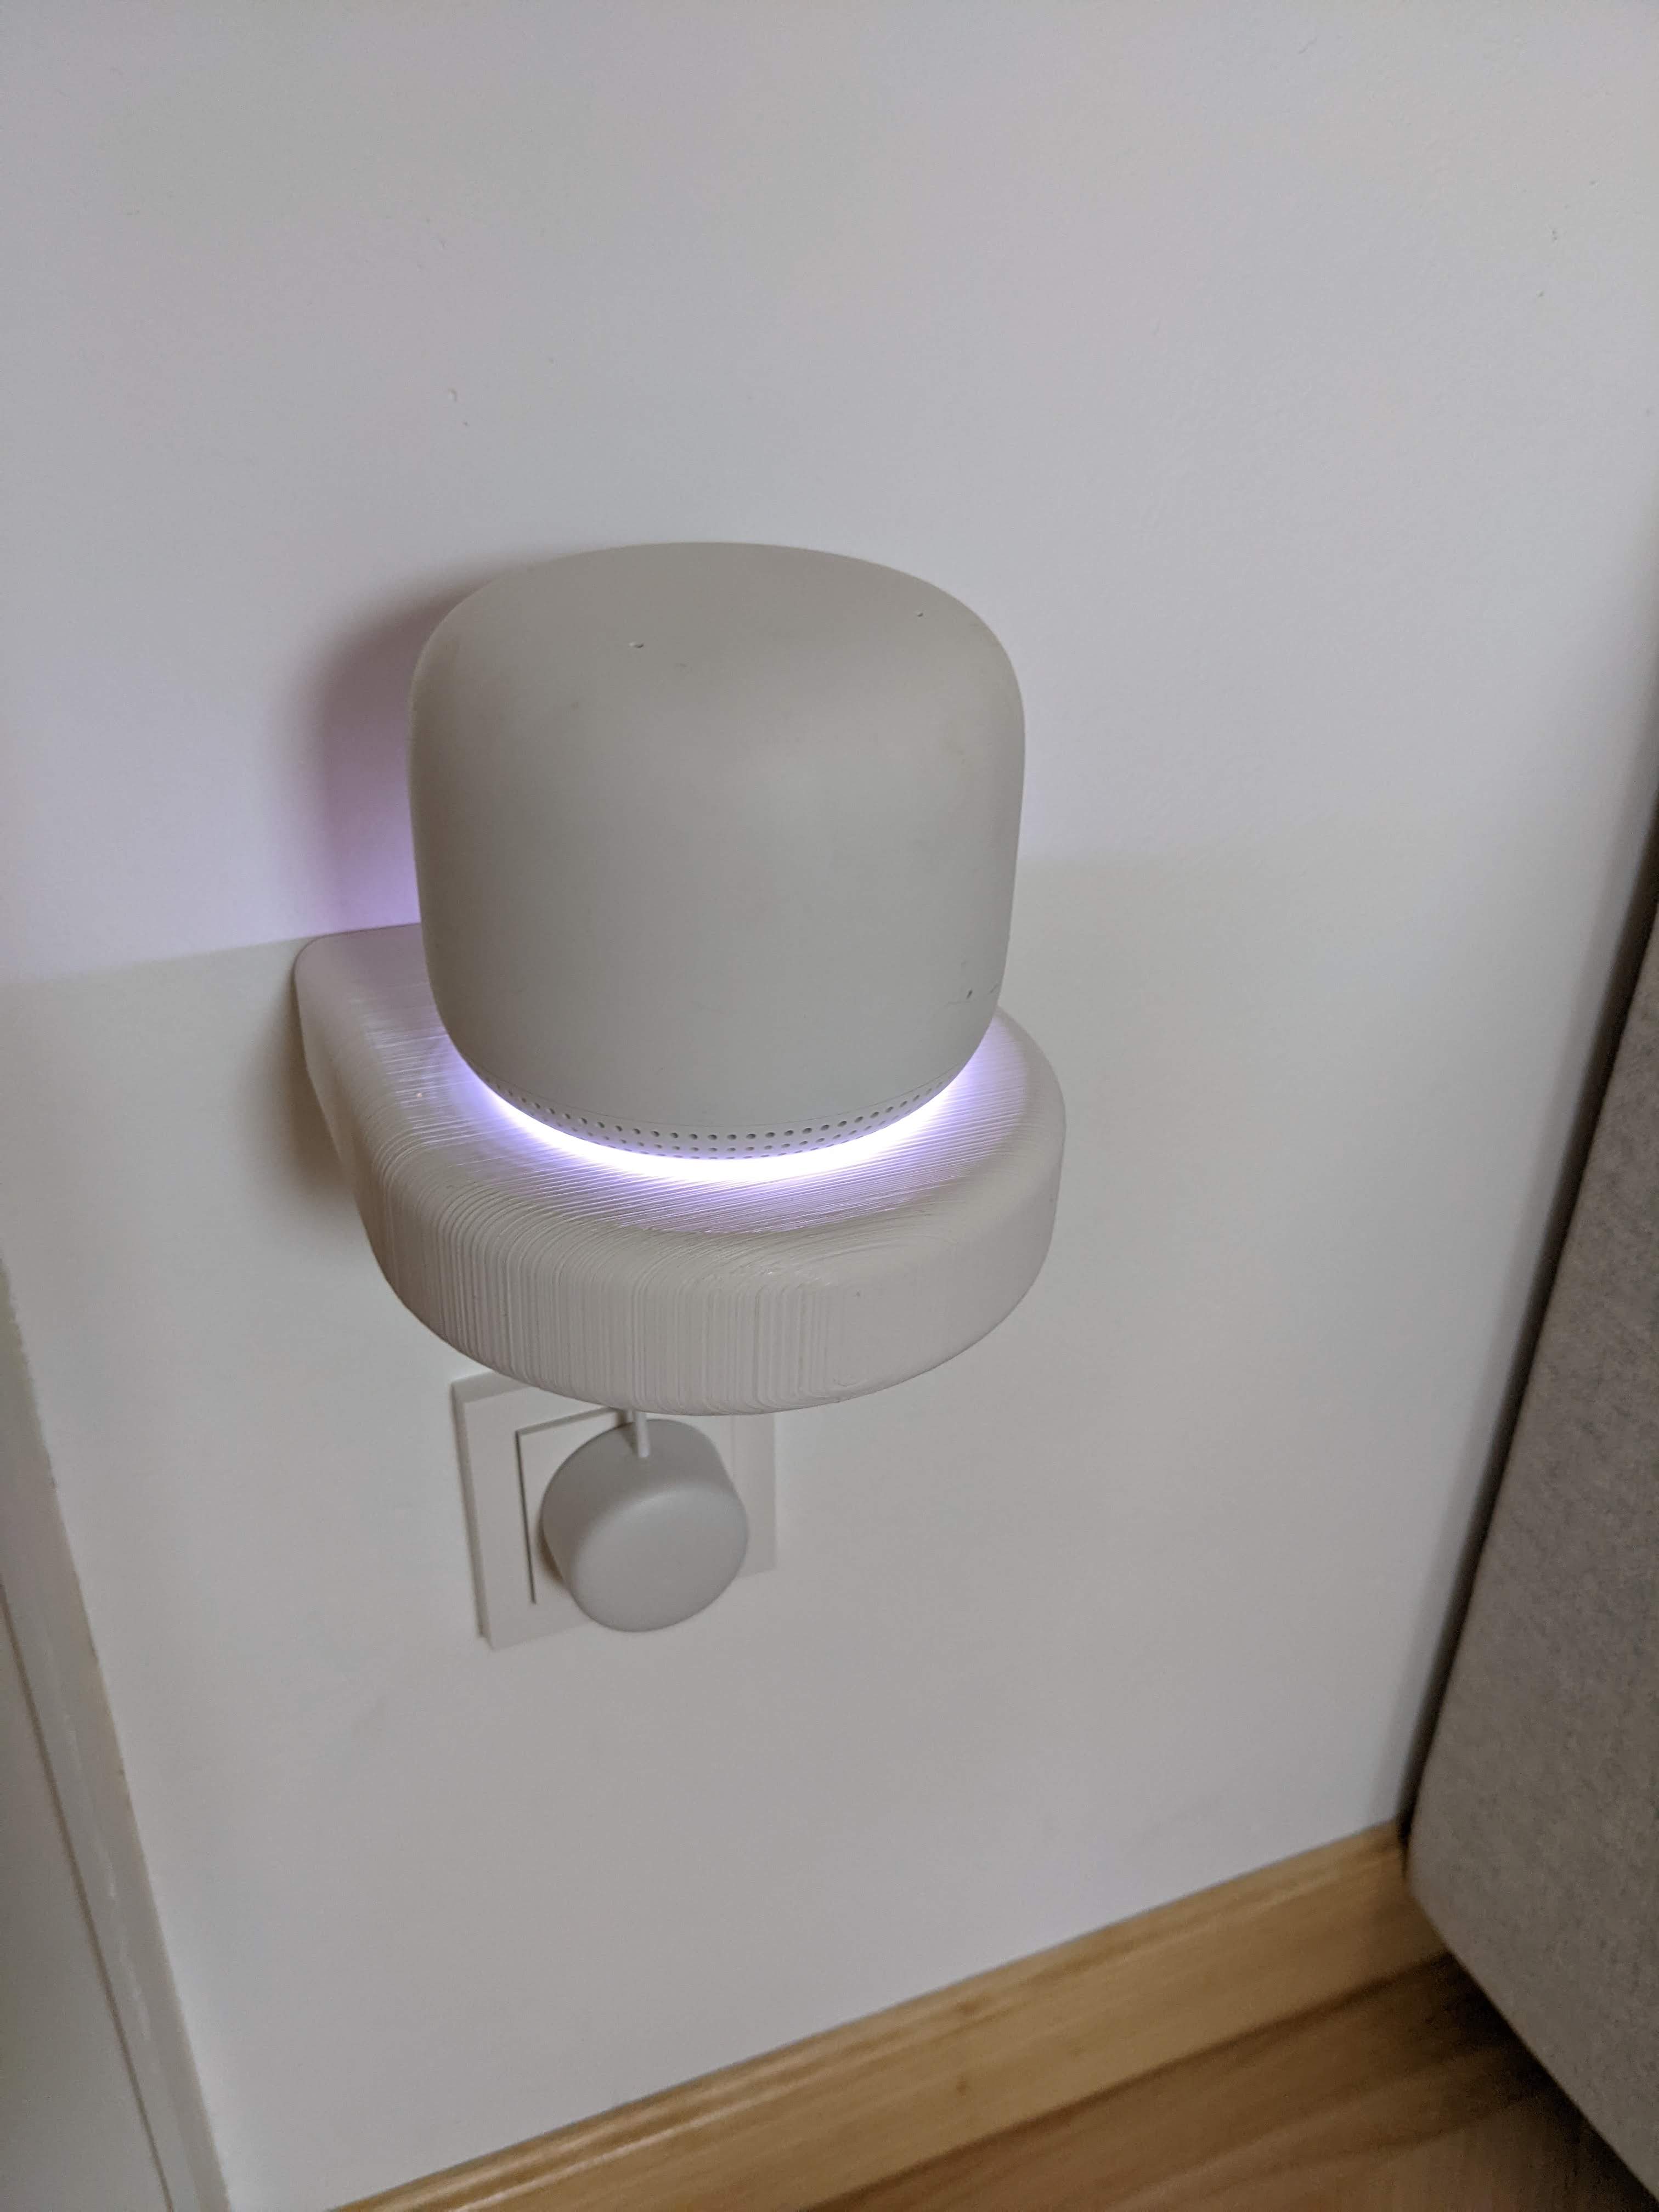 Google Nest Wifi access point wall stand